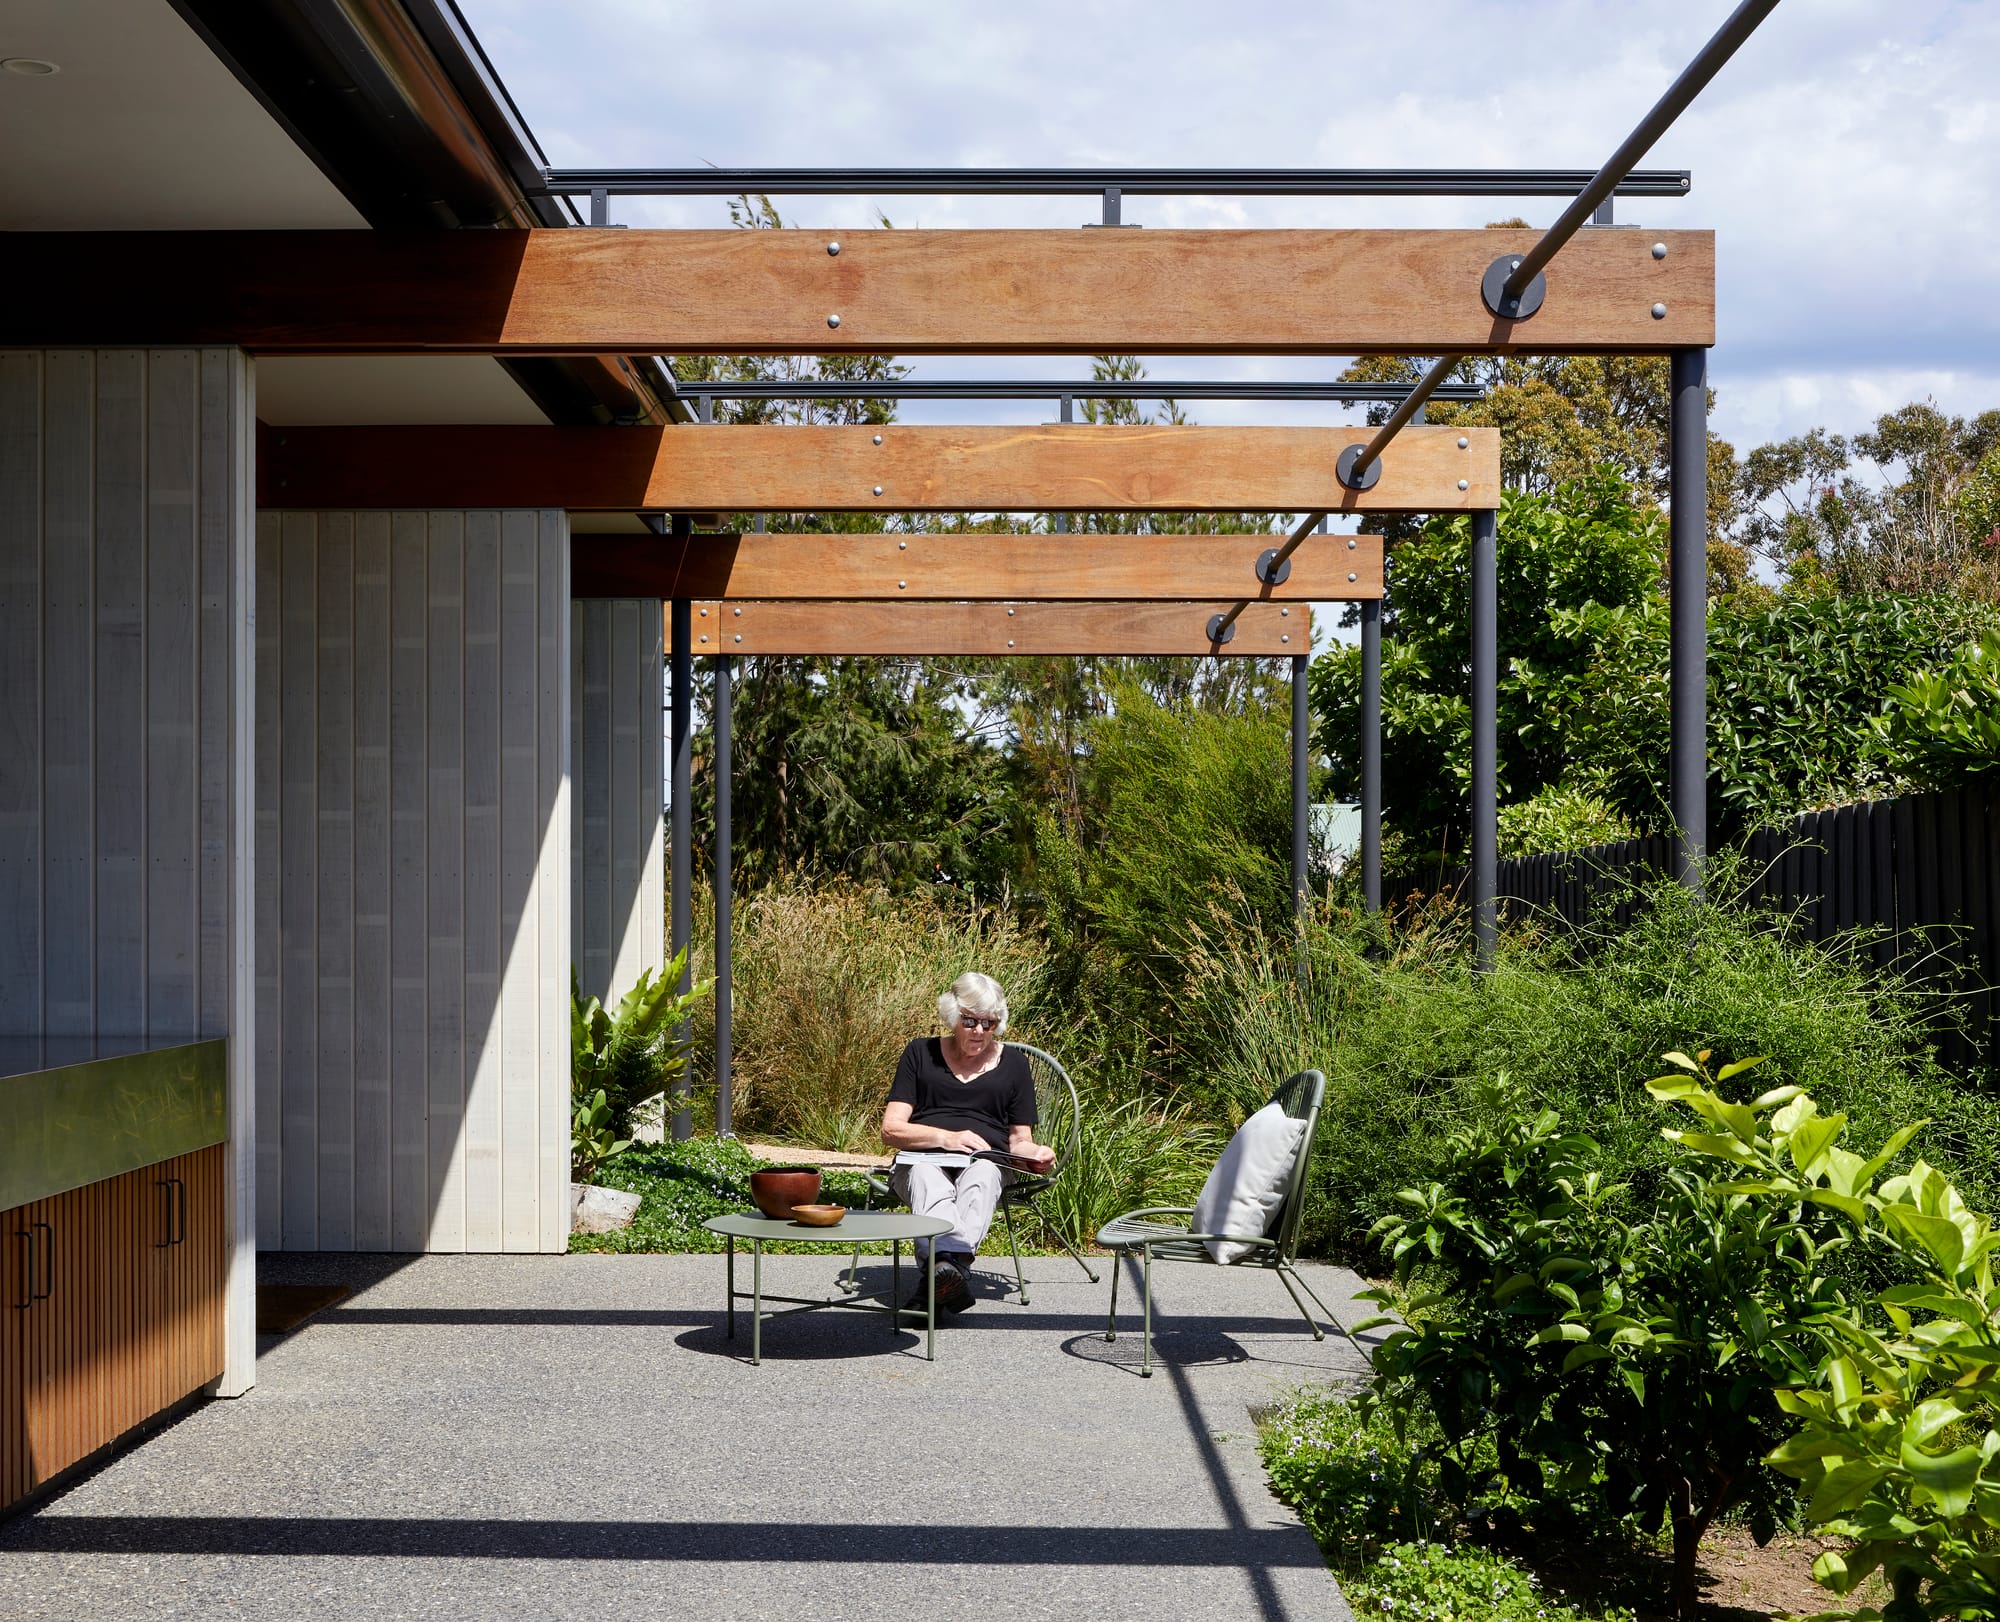 Mt Eliza House by BENT Architecture. Photography by Tatjana Plitt. External patio with concrete floors and brick walls to the left. Exposed timber beams overhand patio floor. Garden grows wildly in background and to right of patio. 